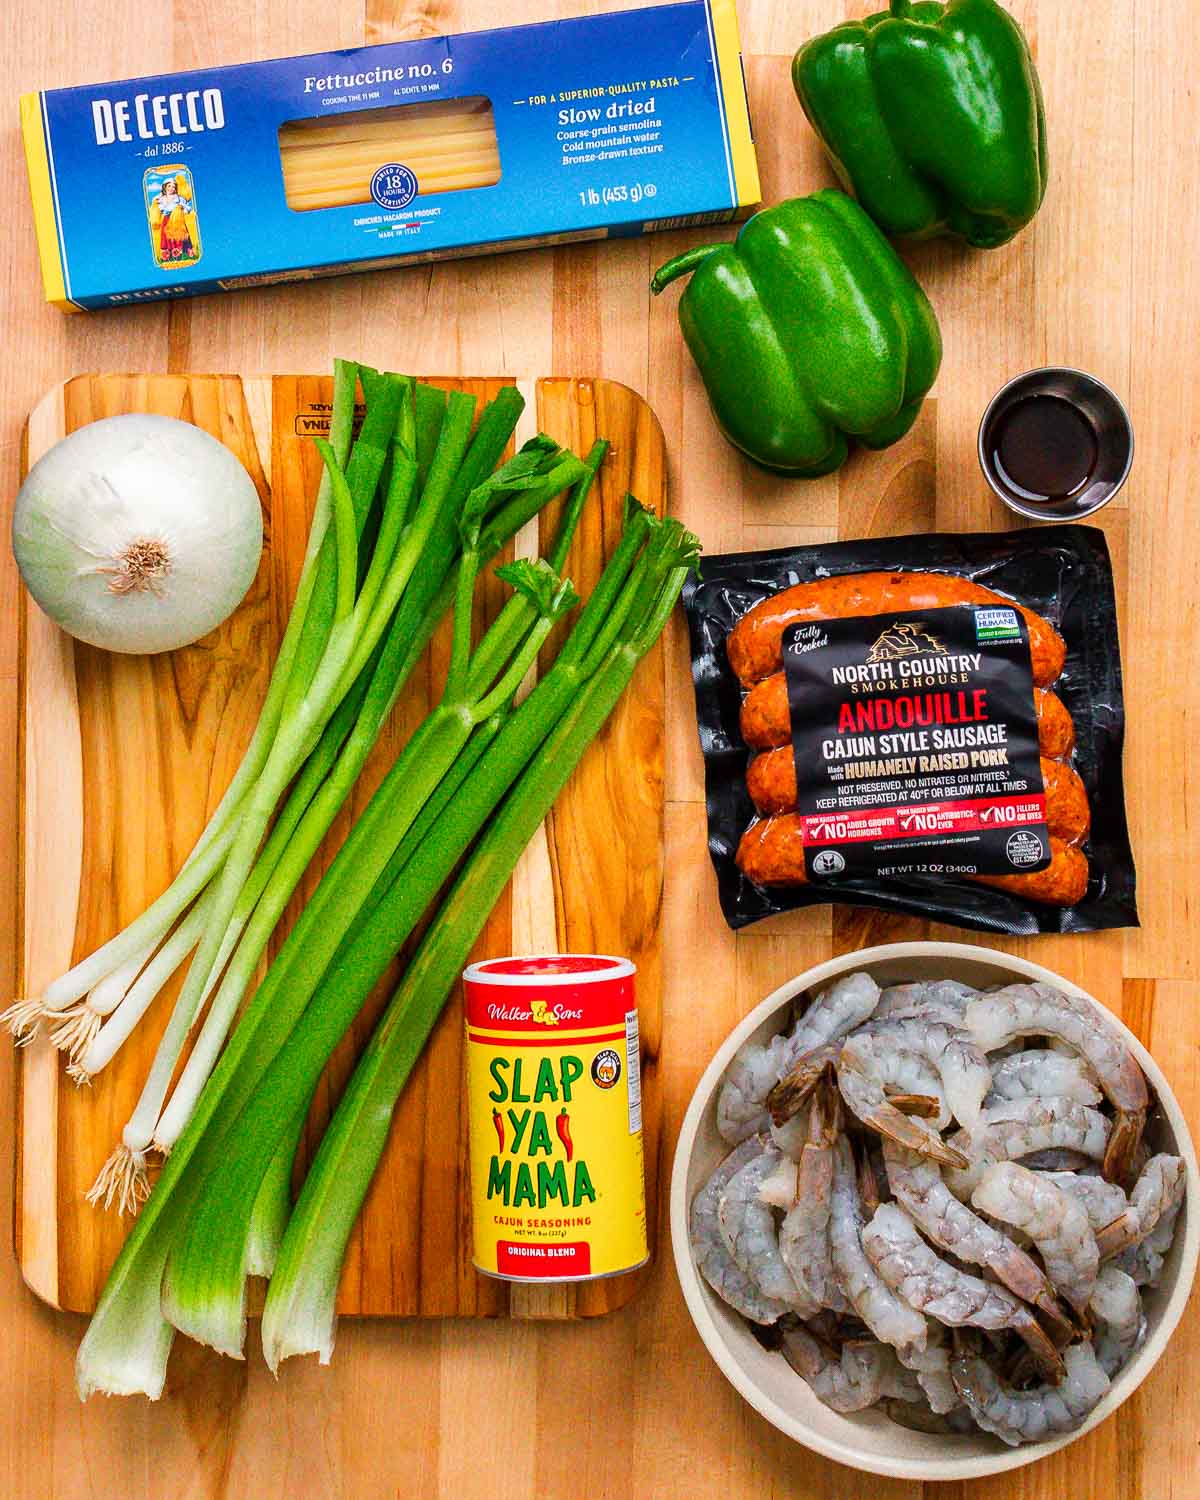 Ingredients shown: pasta, peppers, onion, green onions, celery, Worcestershire sauce, Andouille, Cajun seasoning, and shrimp.